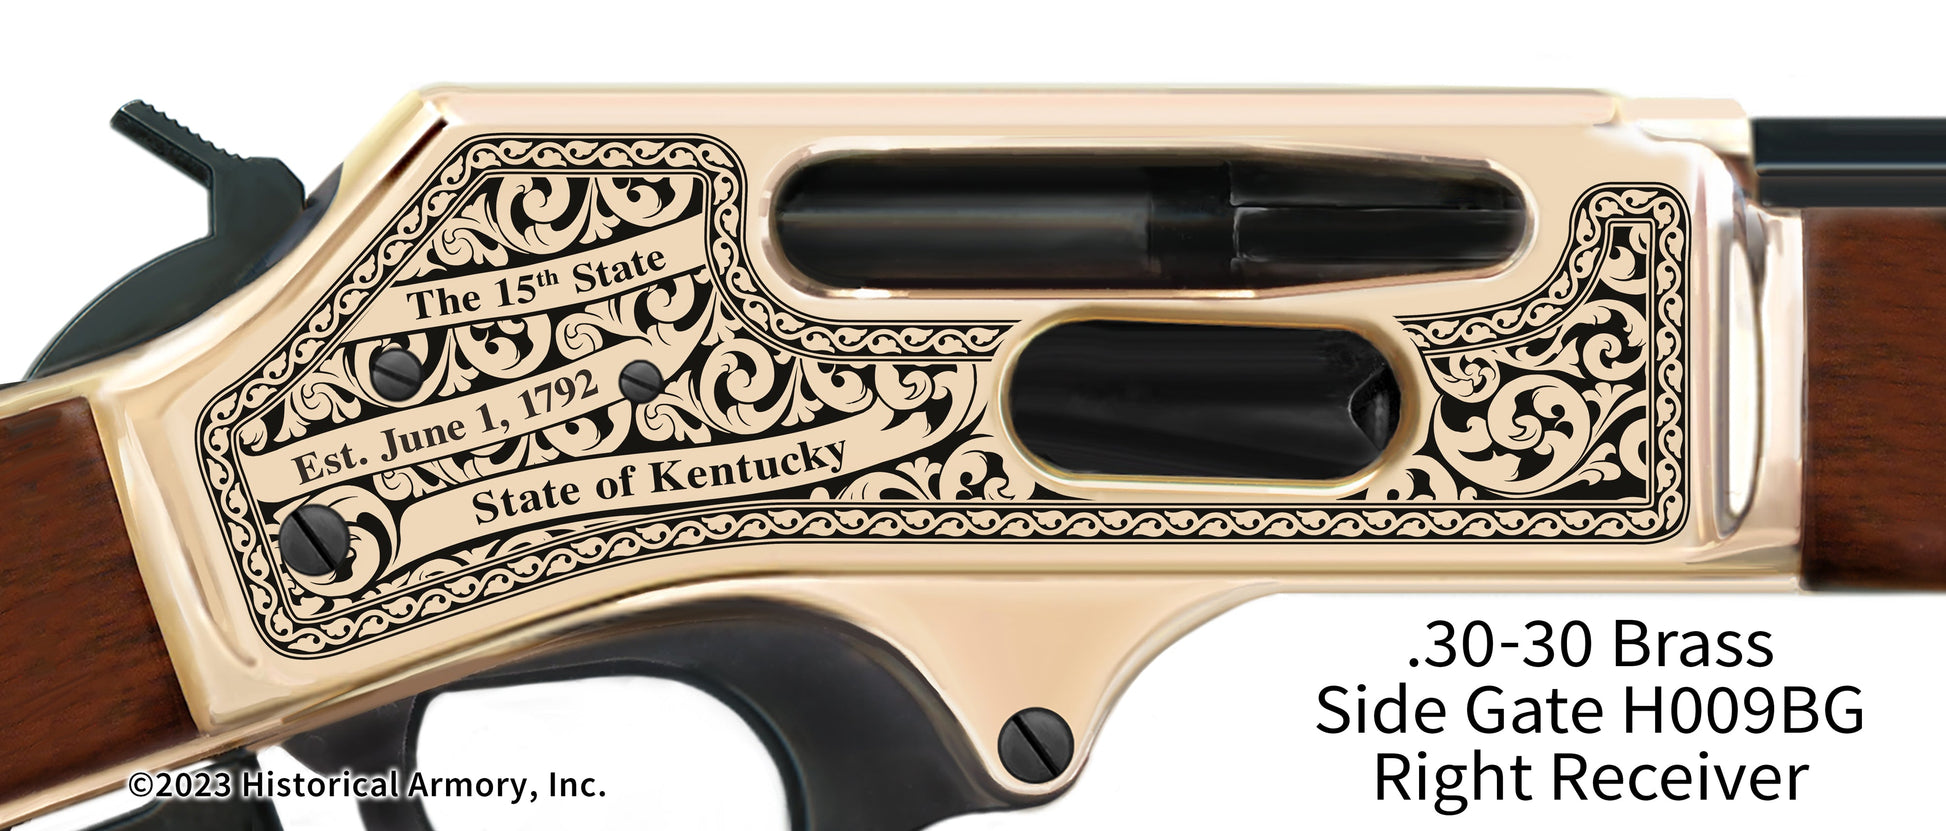 Todd County Kentucky Engraved Henry .30-30 Brass Side Gate Rifle